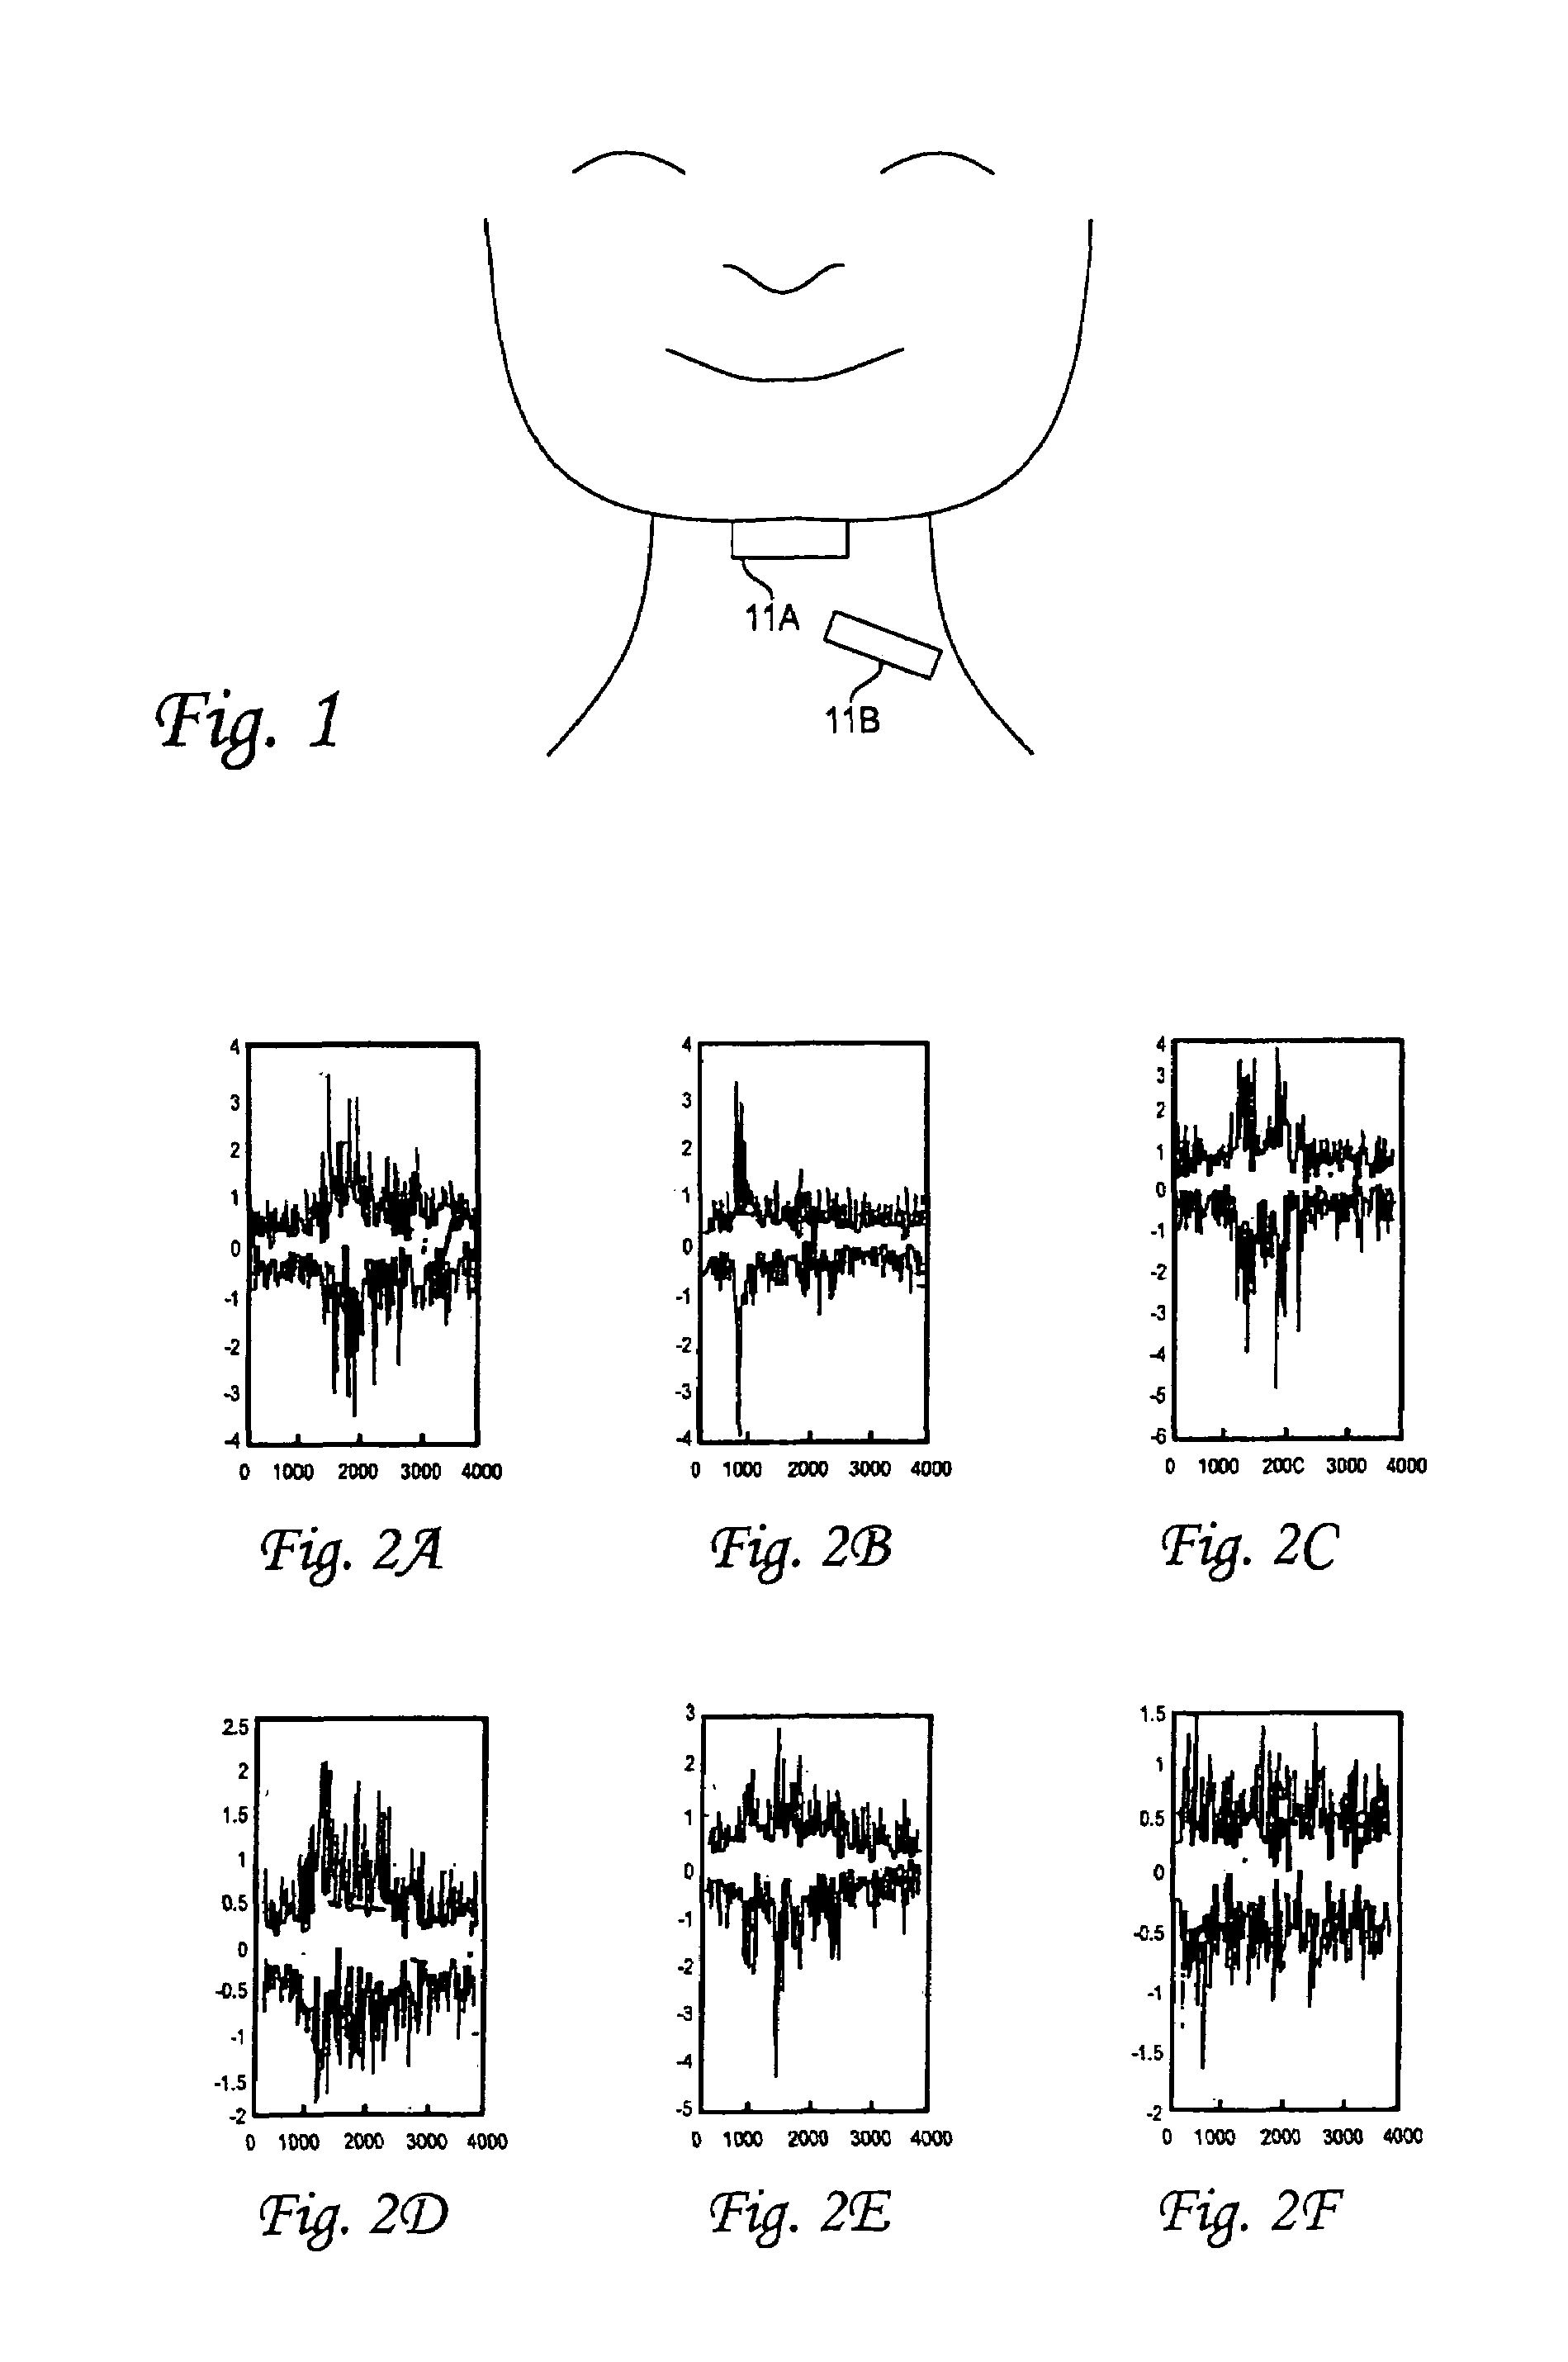 Applications of sub-audible speech recognition based upon electromyographic signals